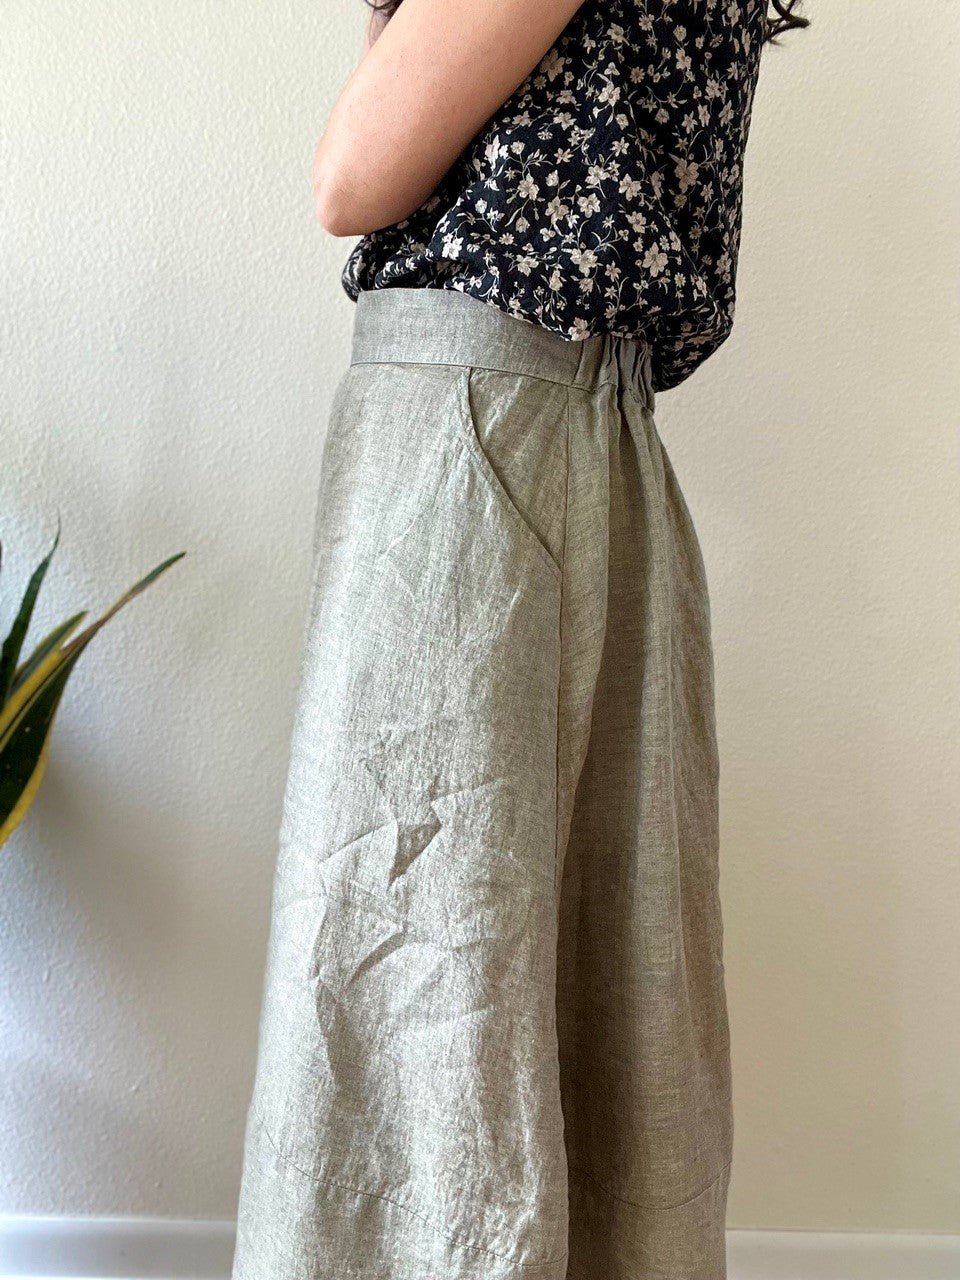 Lotus Jar Skirt Pattern Digital File Download (Free with Fabric Purchase) - The Linen Lab -